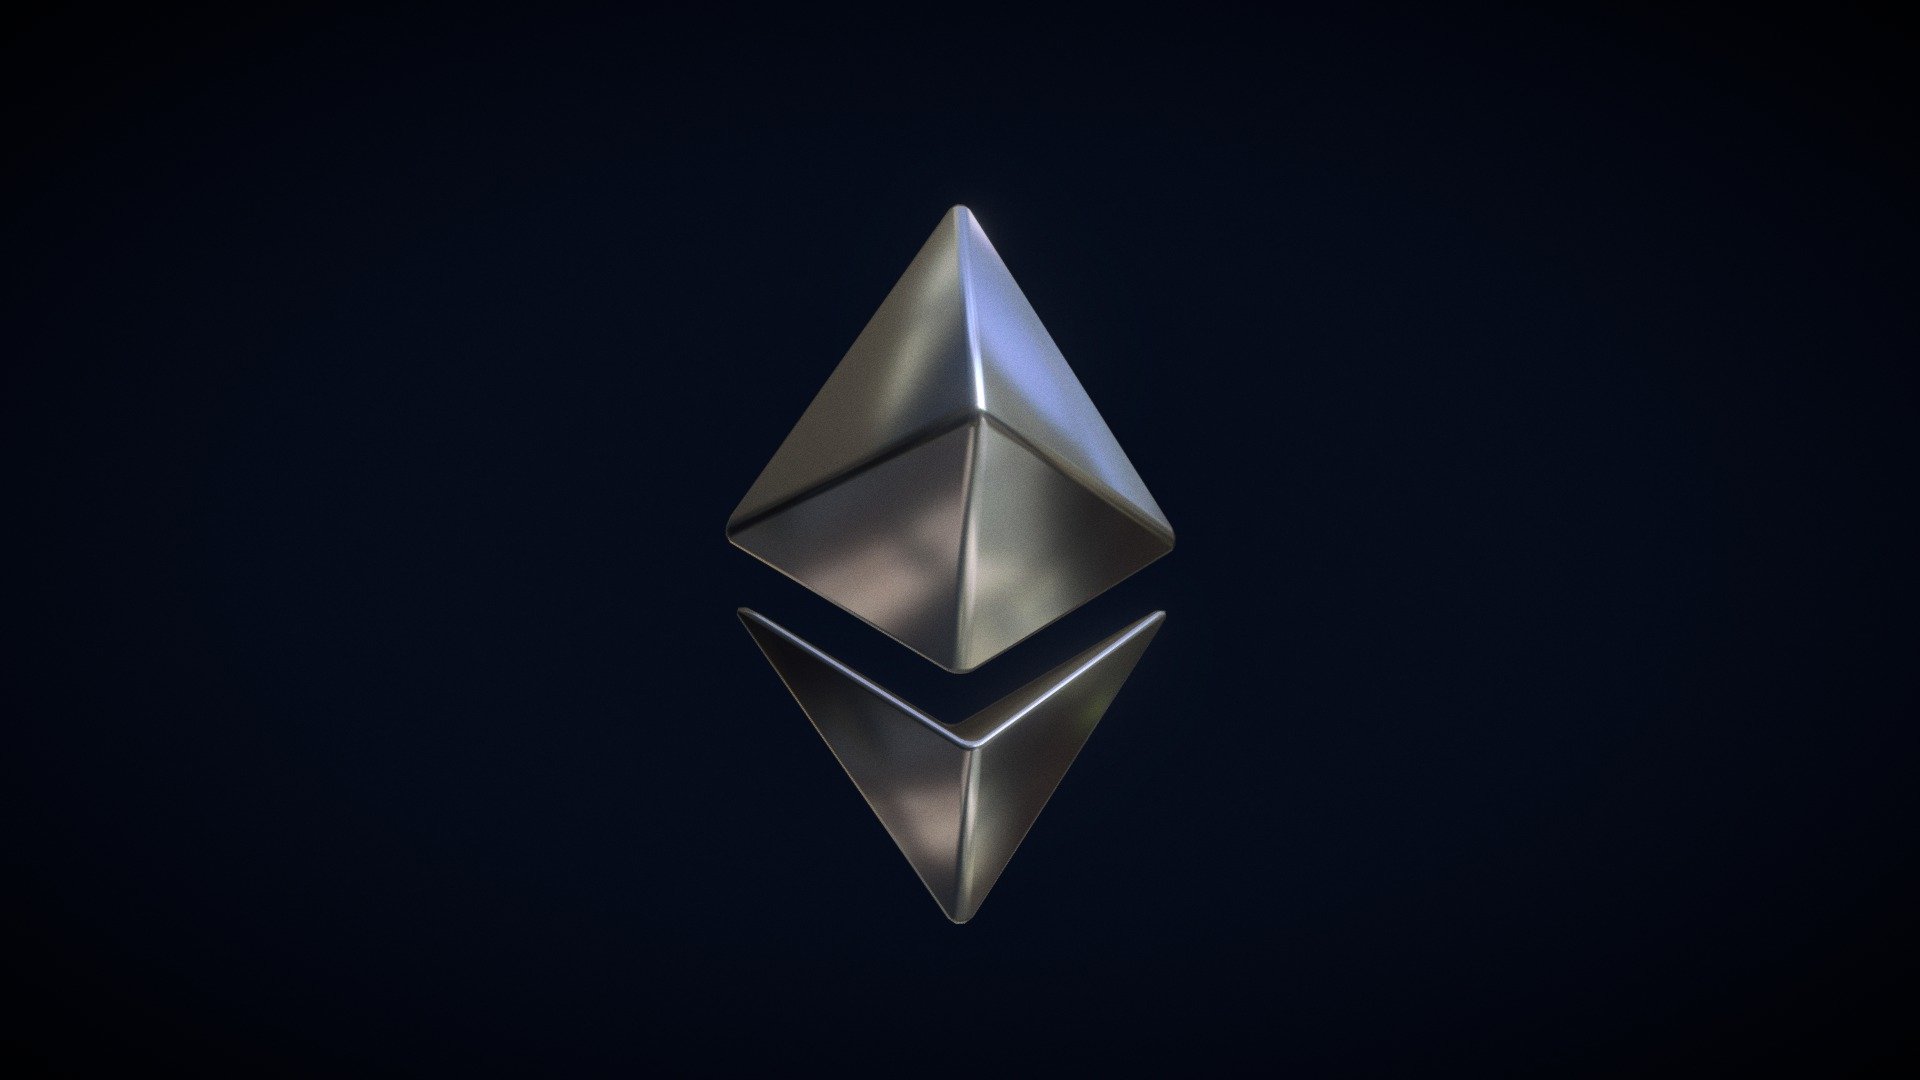 3D model of decentralized cryptocurrency &ldquo;Ethereum